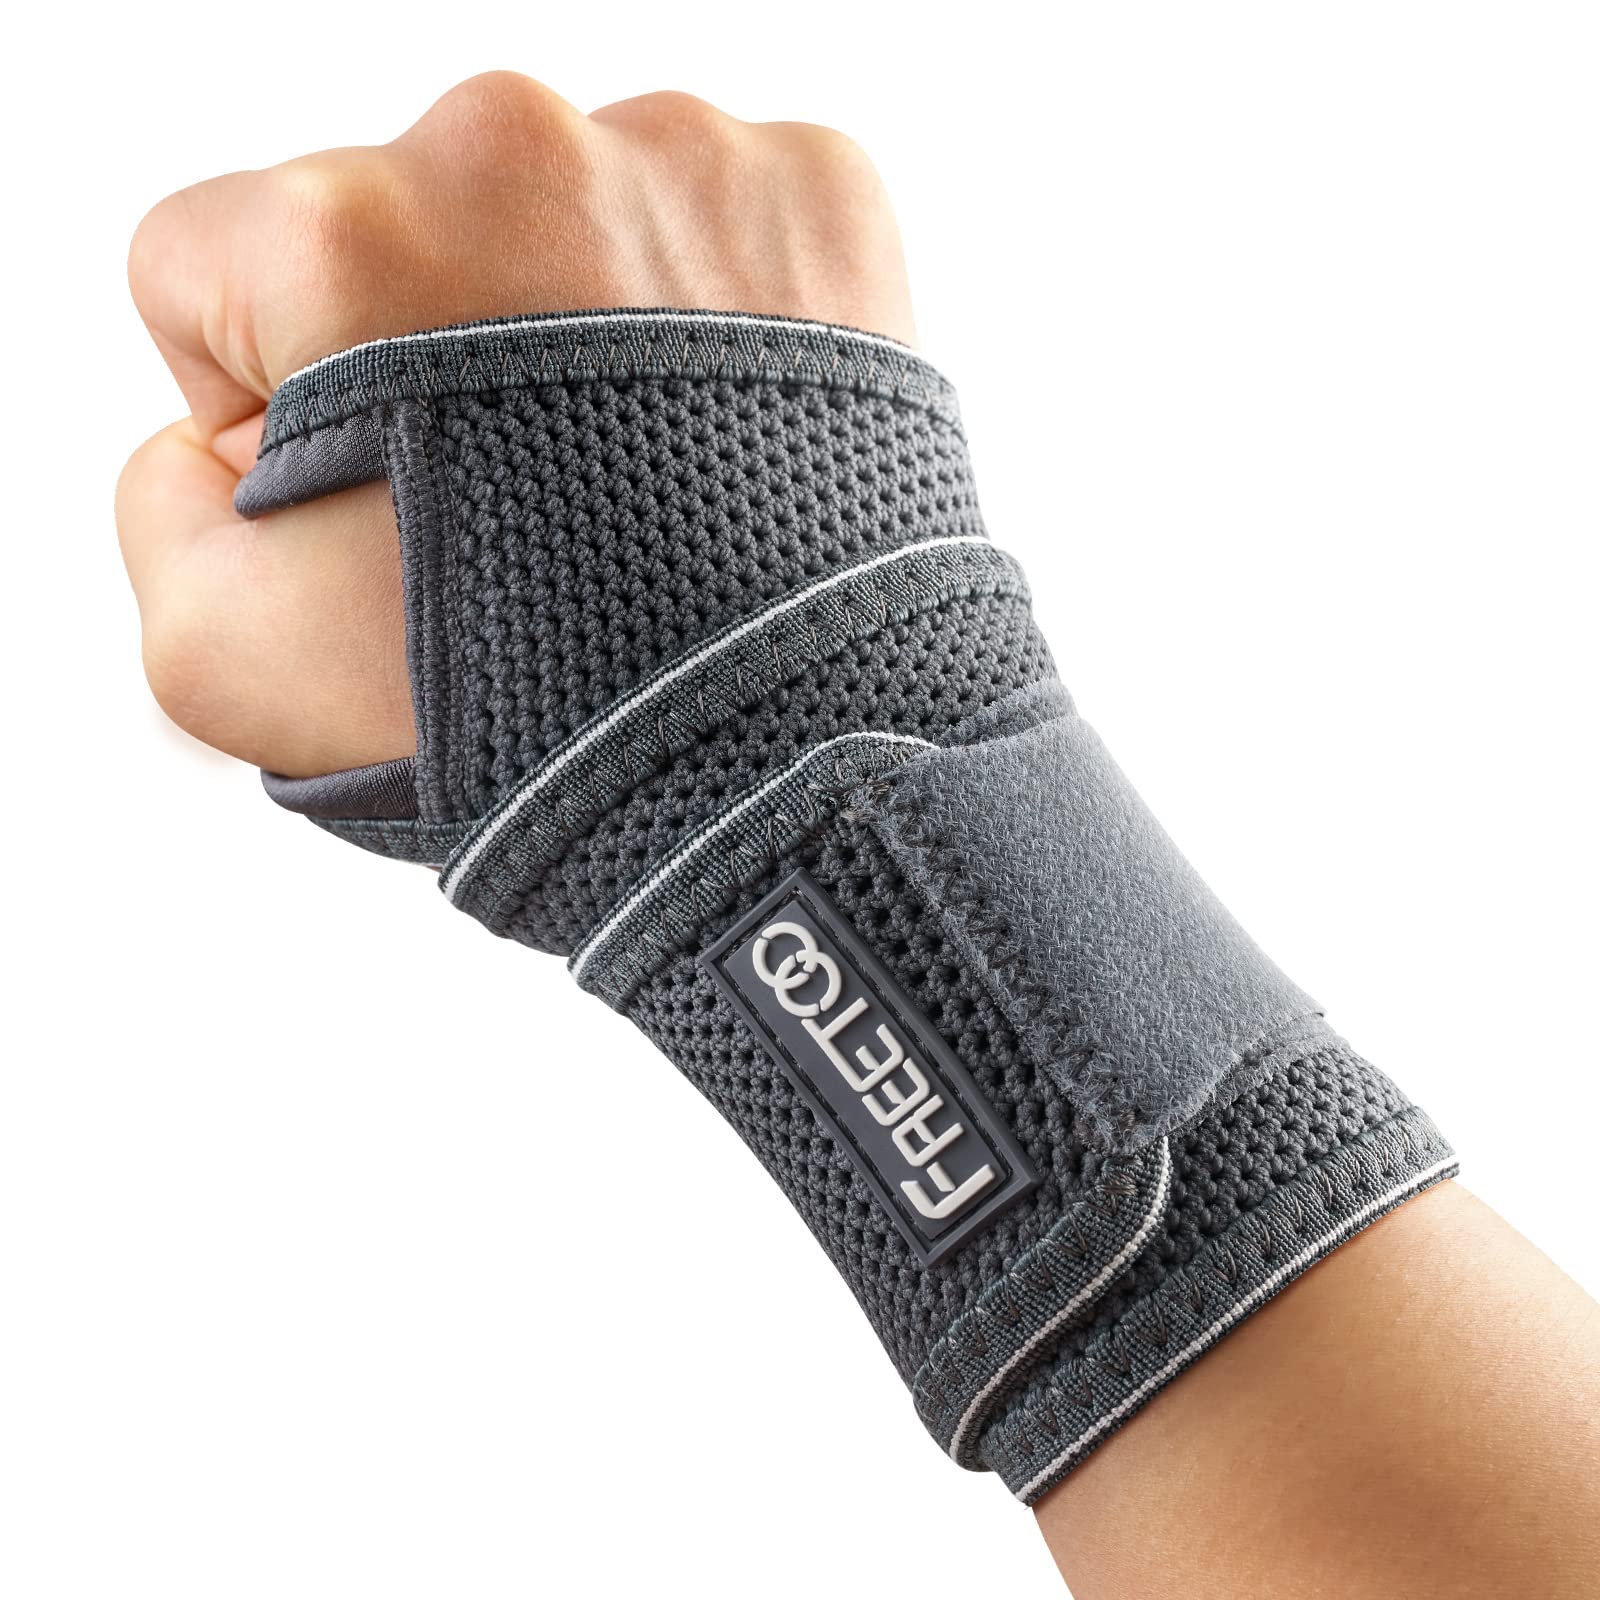 FREETOO Wrist Brace for Carpal Tunnel Relief Light Support, - Compression Wrist  Support for Workout Women Men